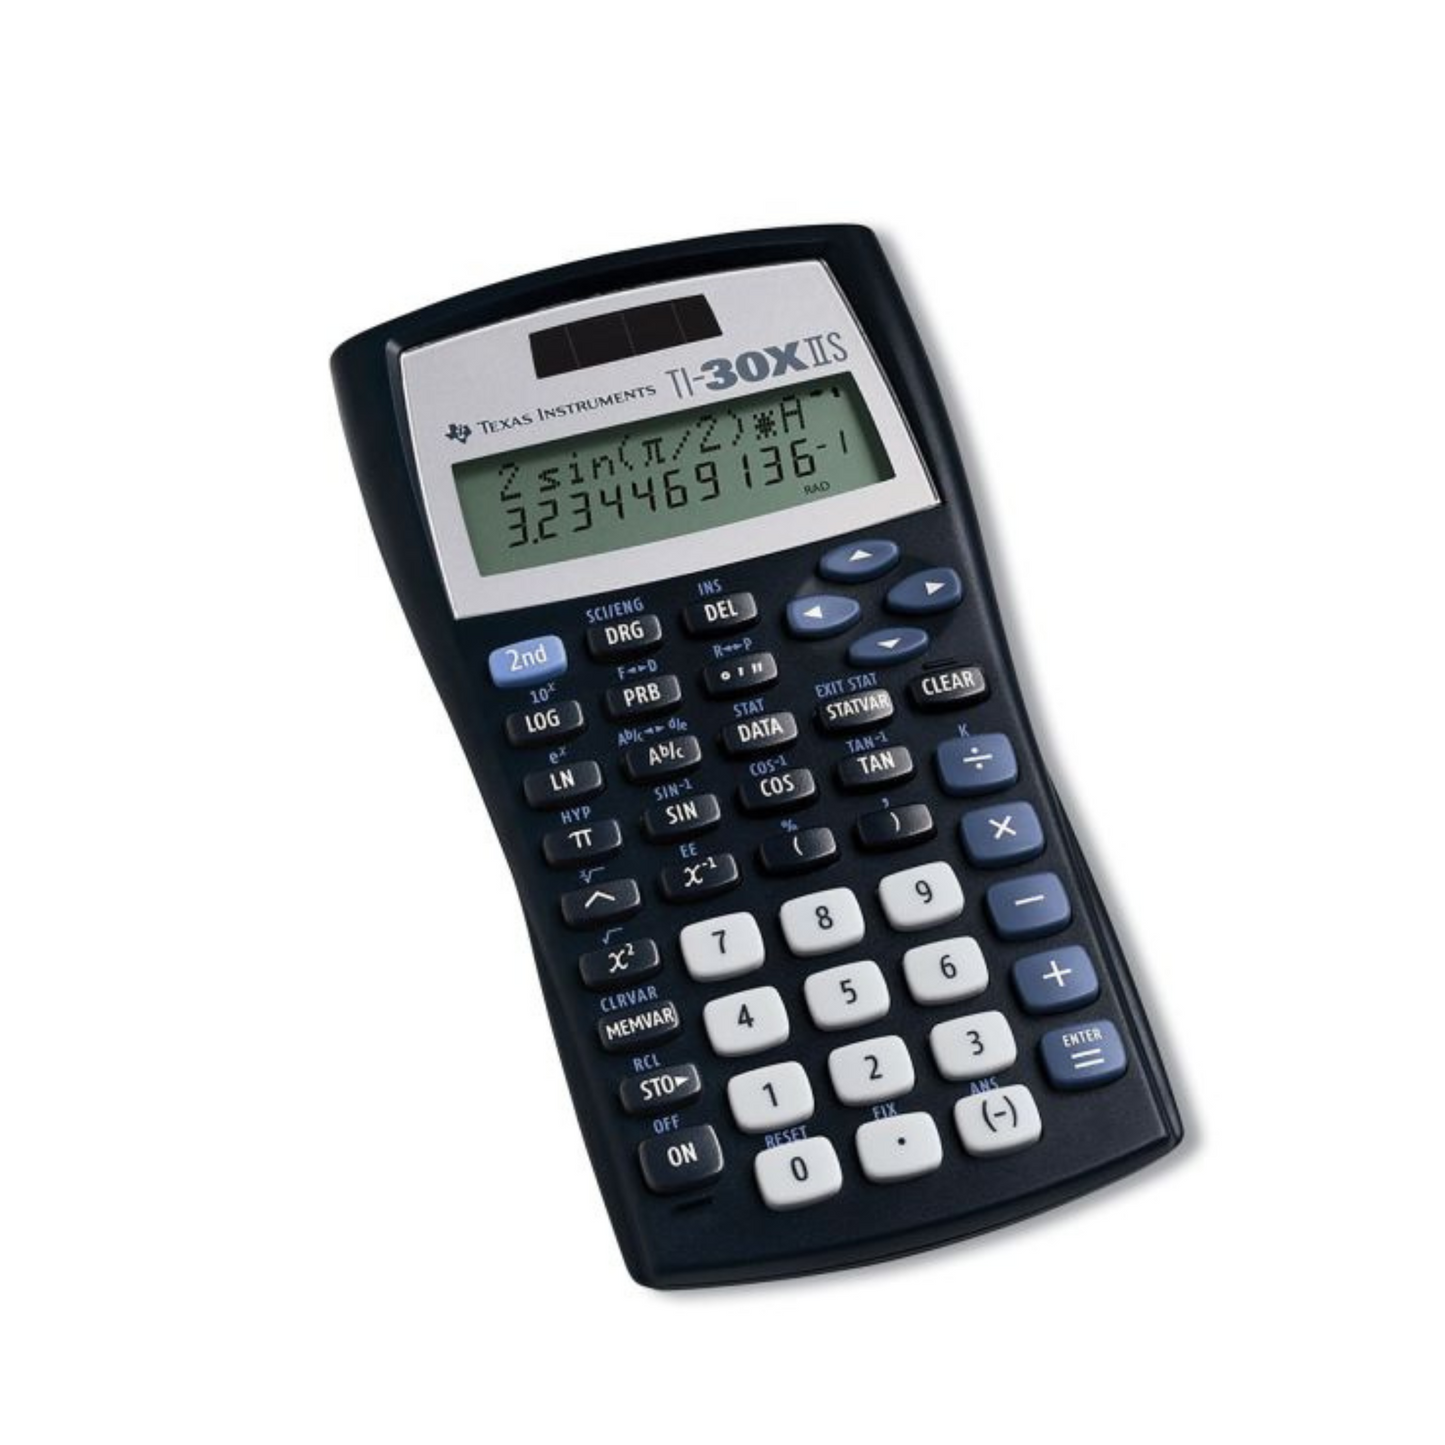 Texas Instruments TI-30XIIS 10-Digit Scientific Calculator Solar Powered and Battery (Black)